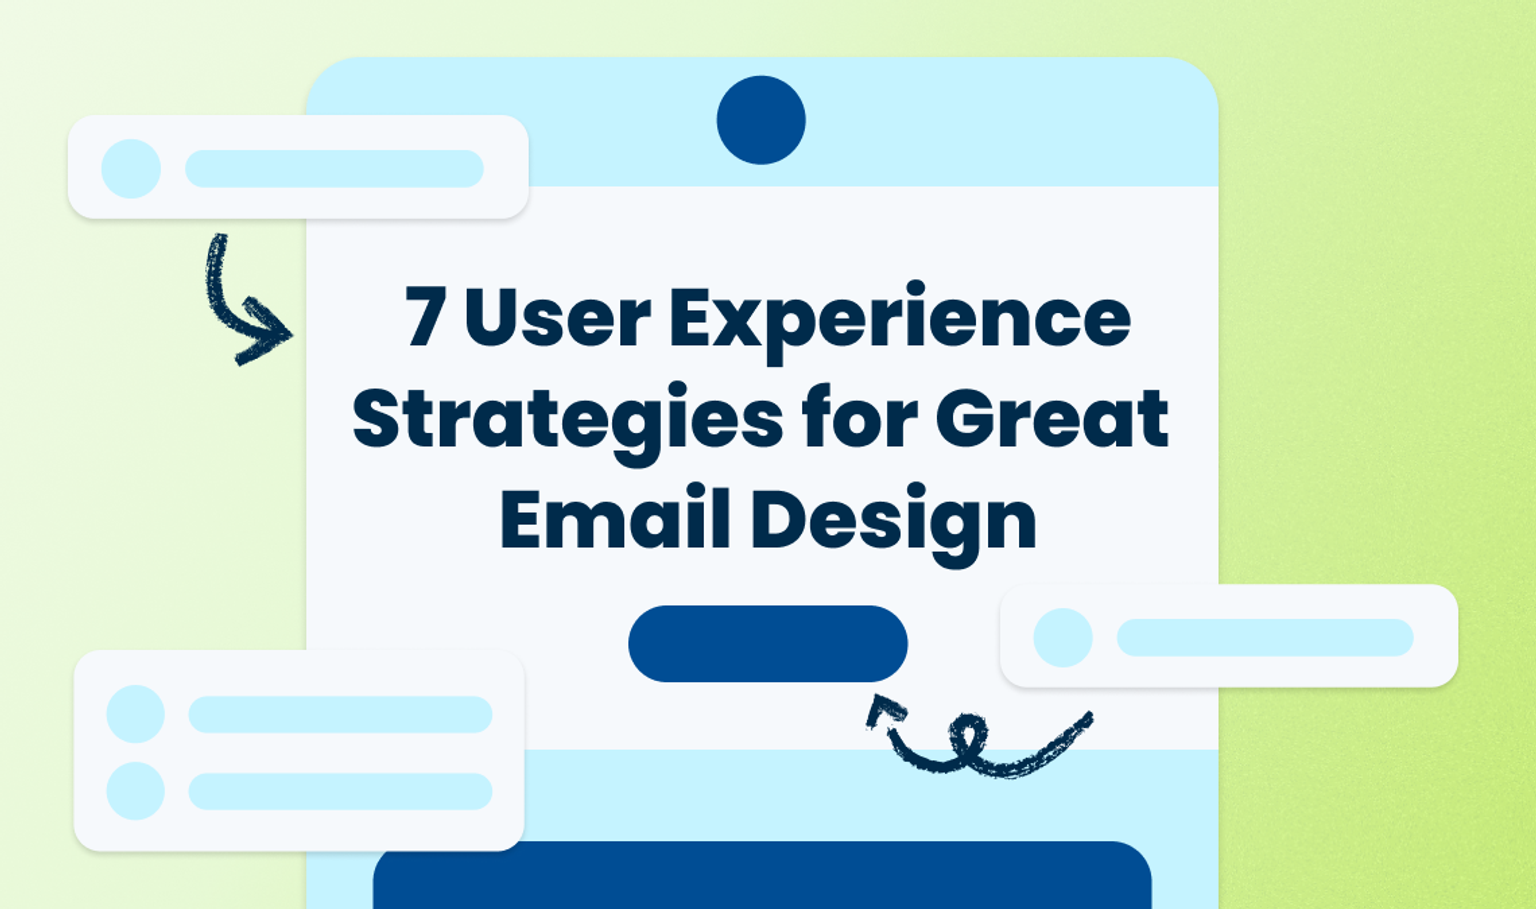 7 User Experience (UX) Strategies for Great Email Design